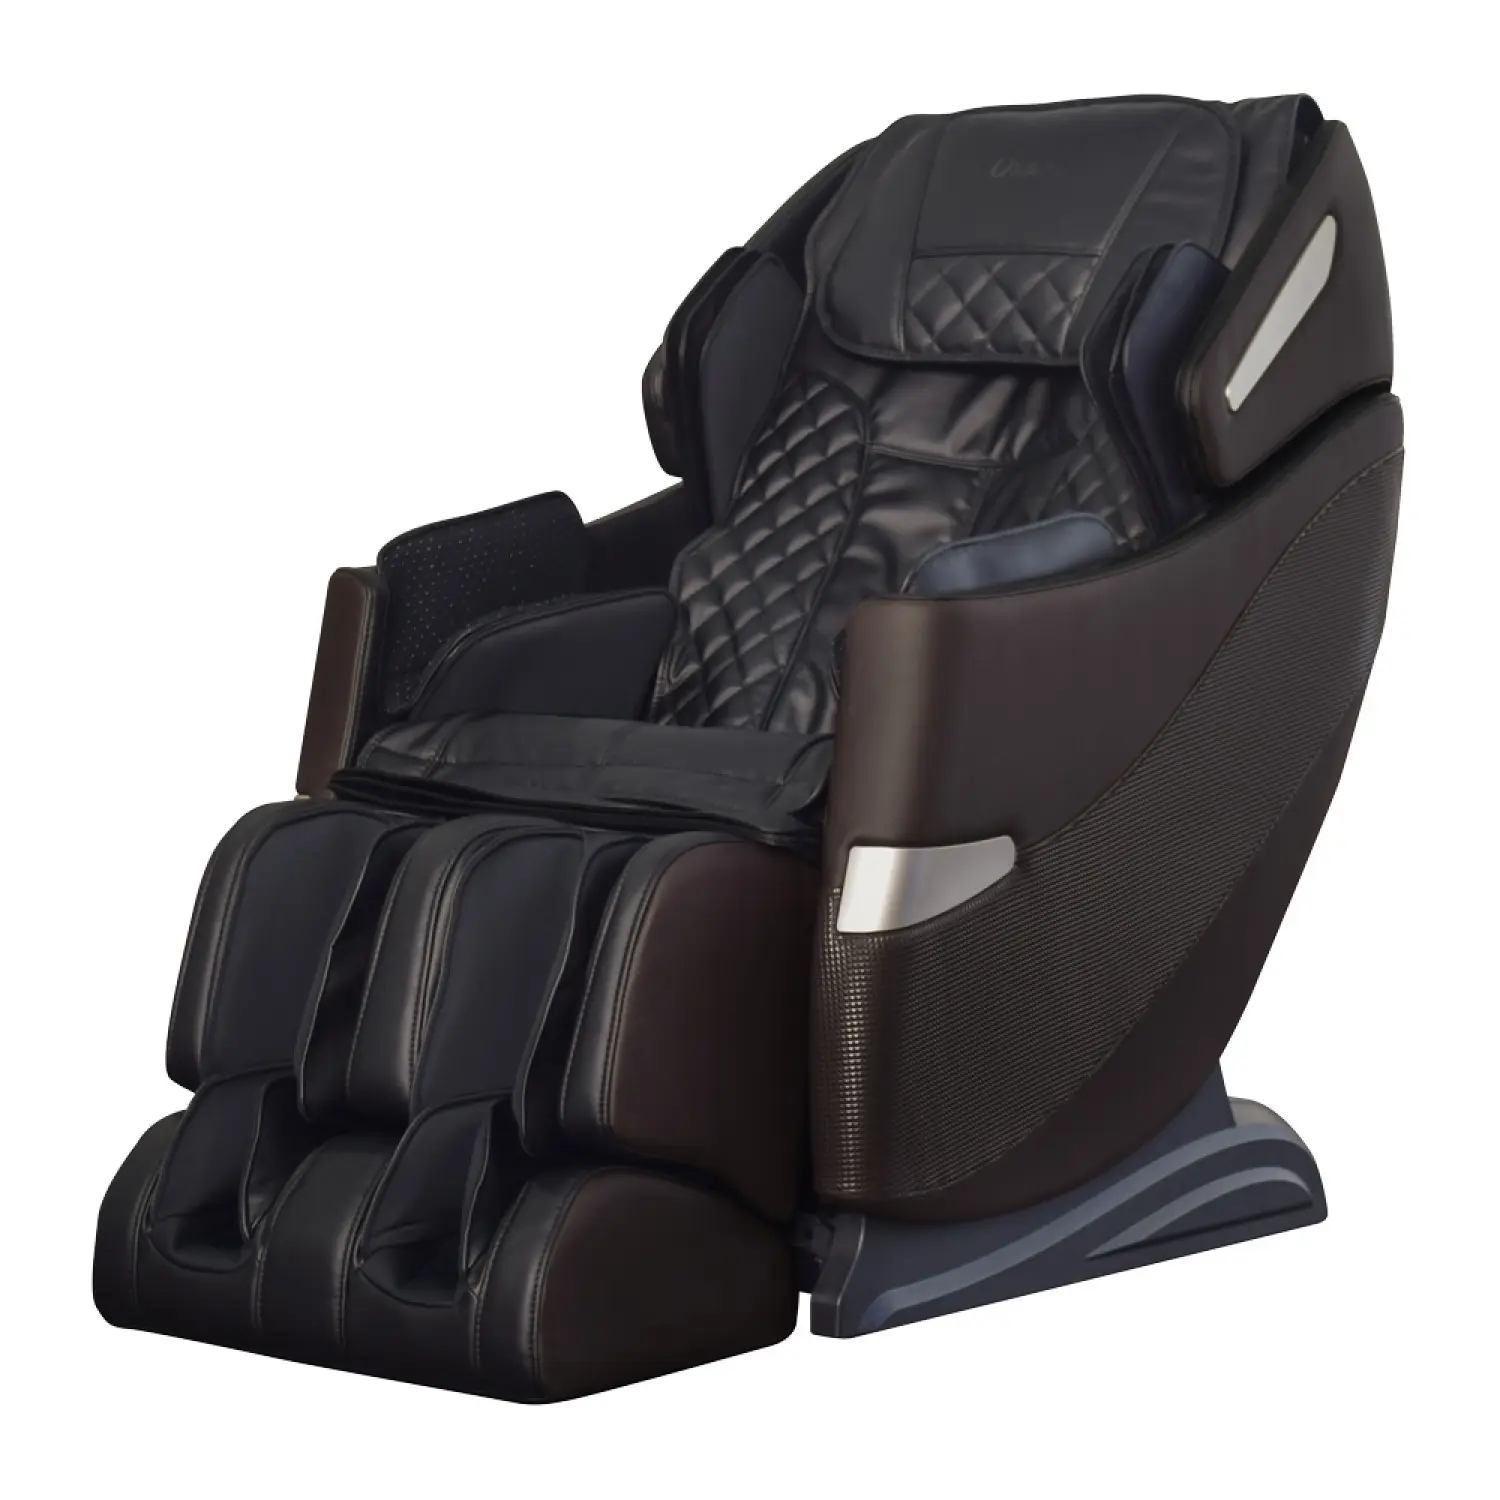 Osaki OS-Pro Honor 3D Full Body Compression Massage Chair (Black, Brown or Beige)